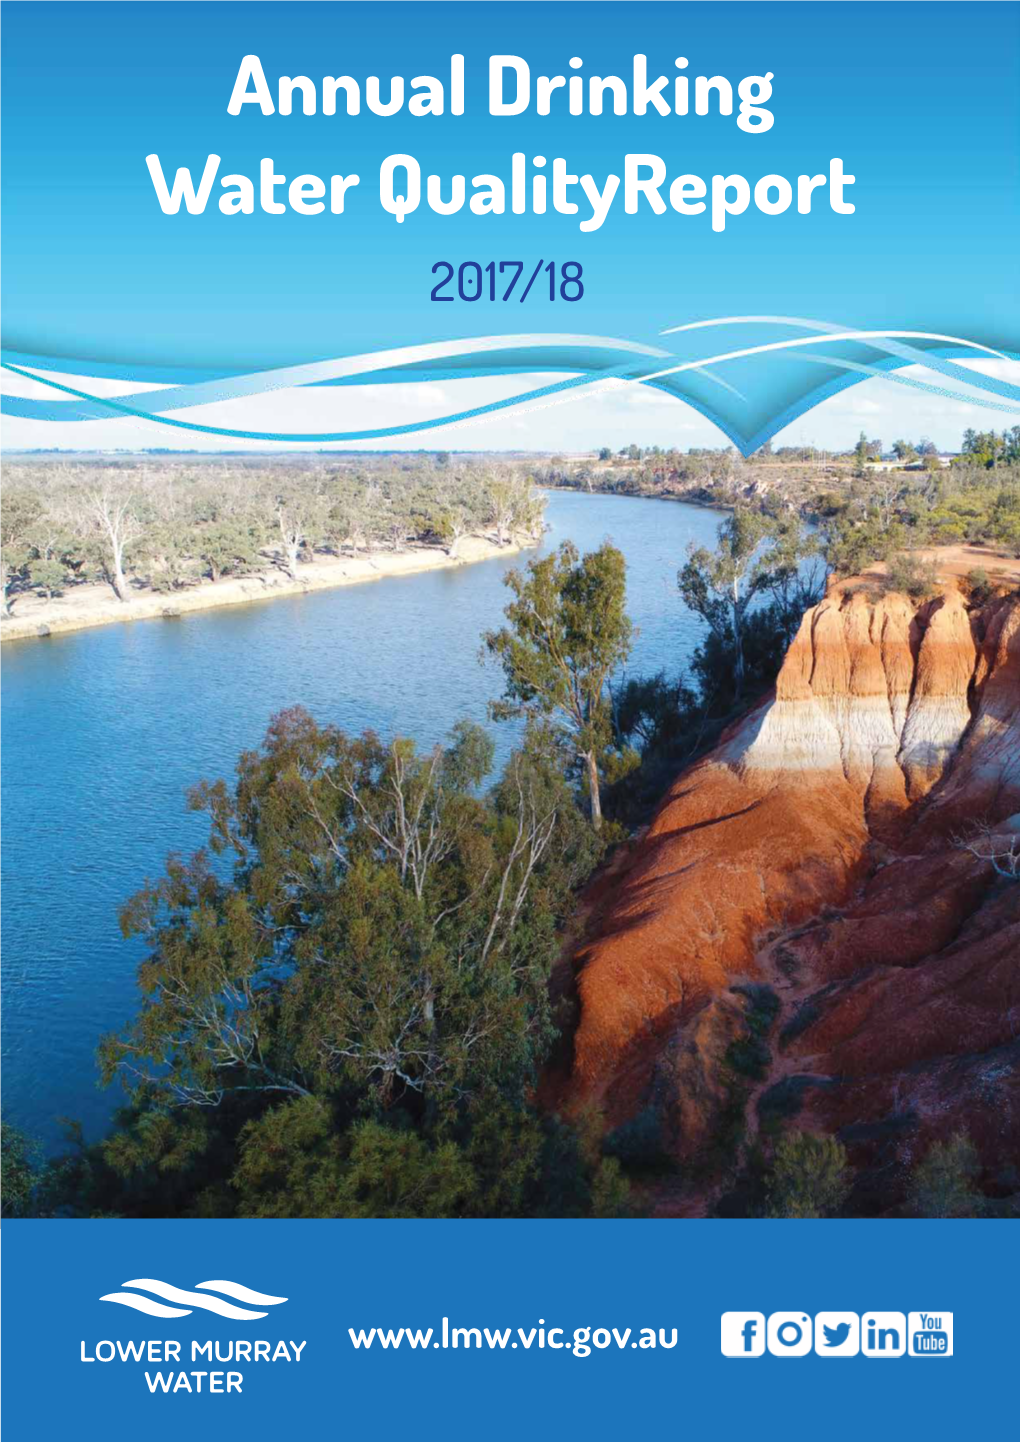 Annual Drinking Water Qualityreport 2017/18